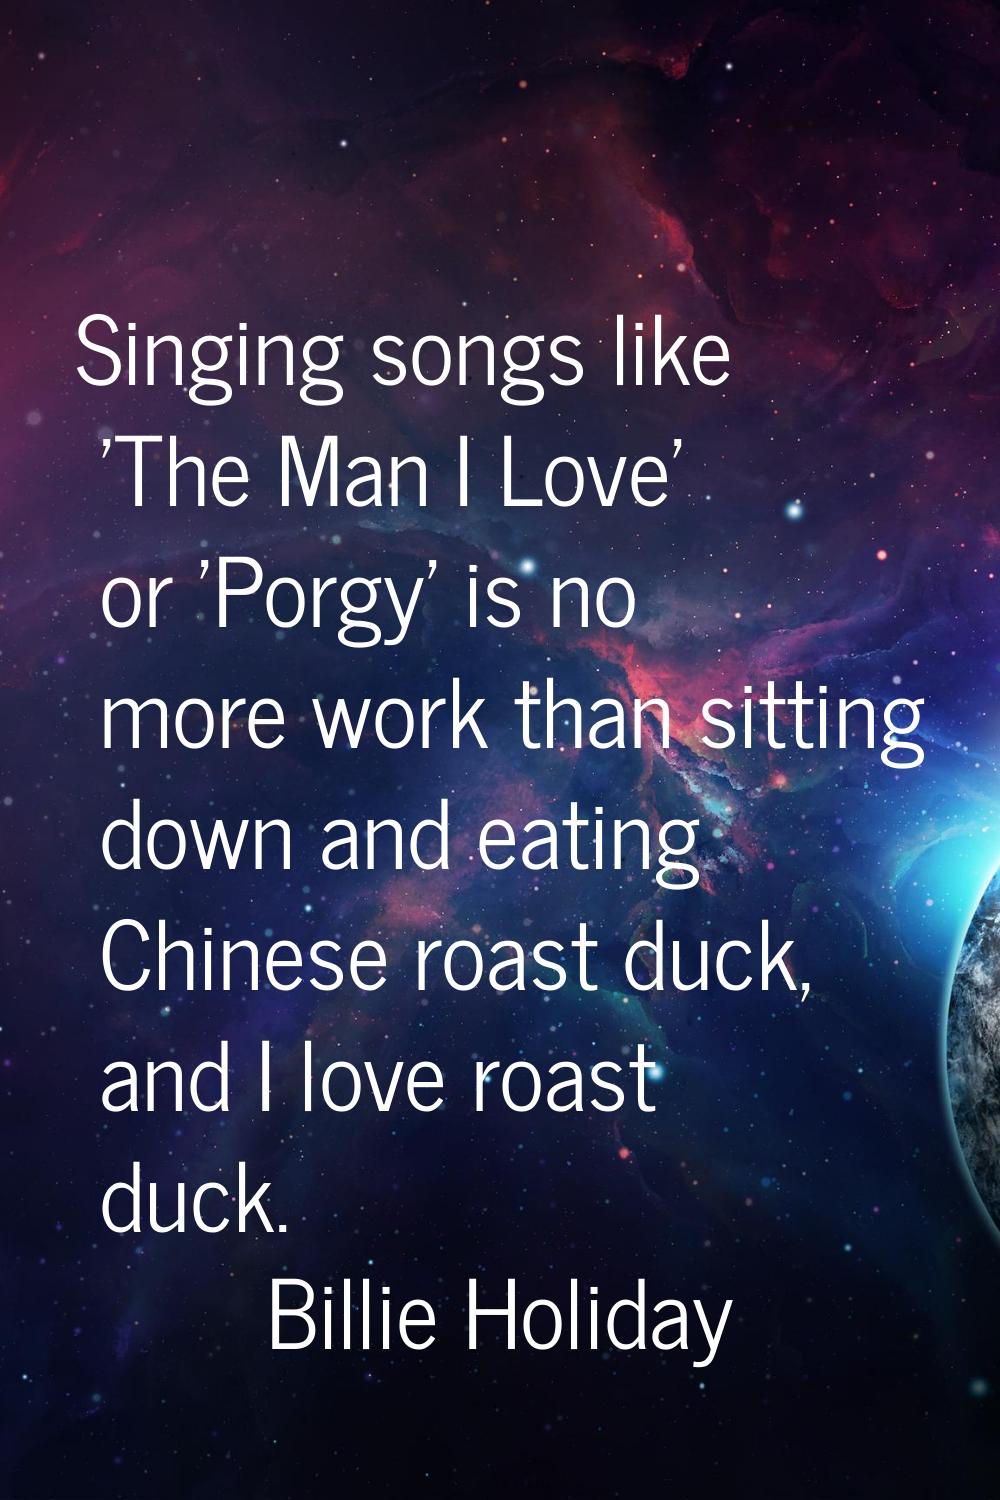 Singing songs like 'The Man I Love' or 'Porgy' is no more work than sitting down and eating Chinese